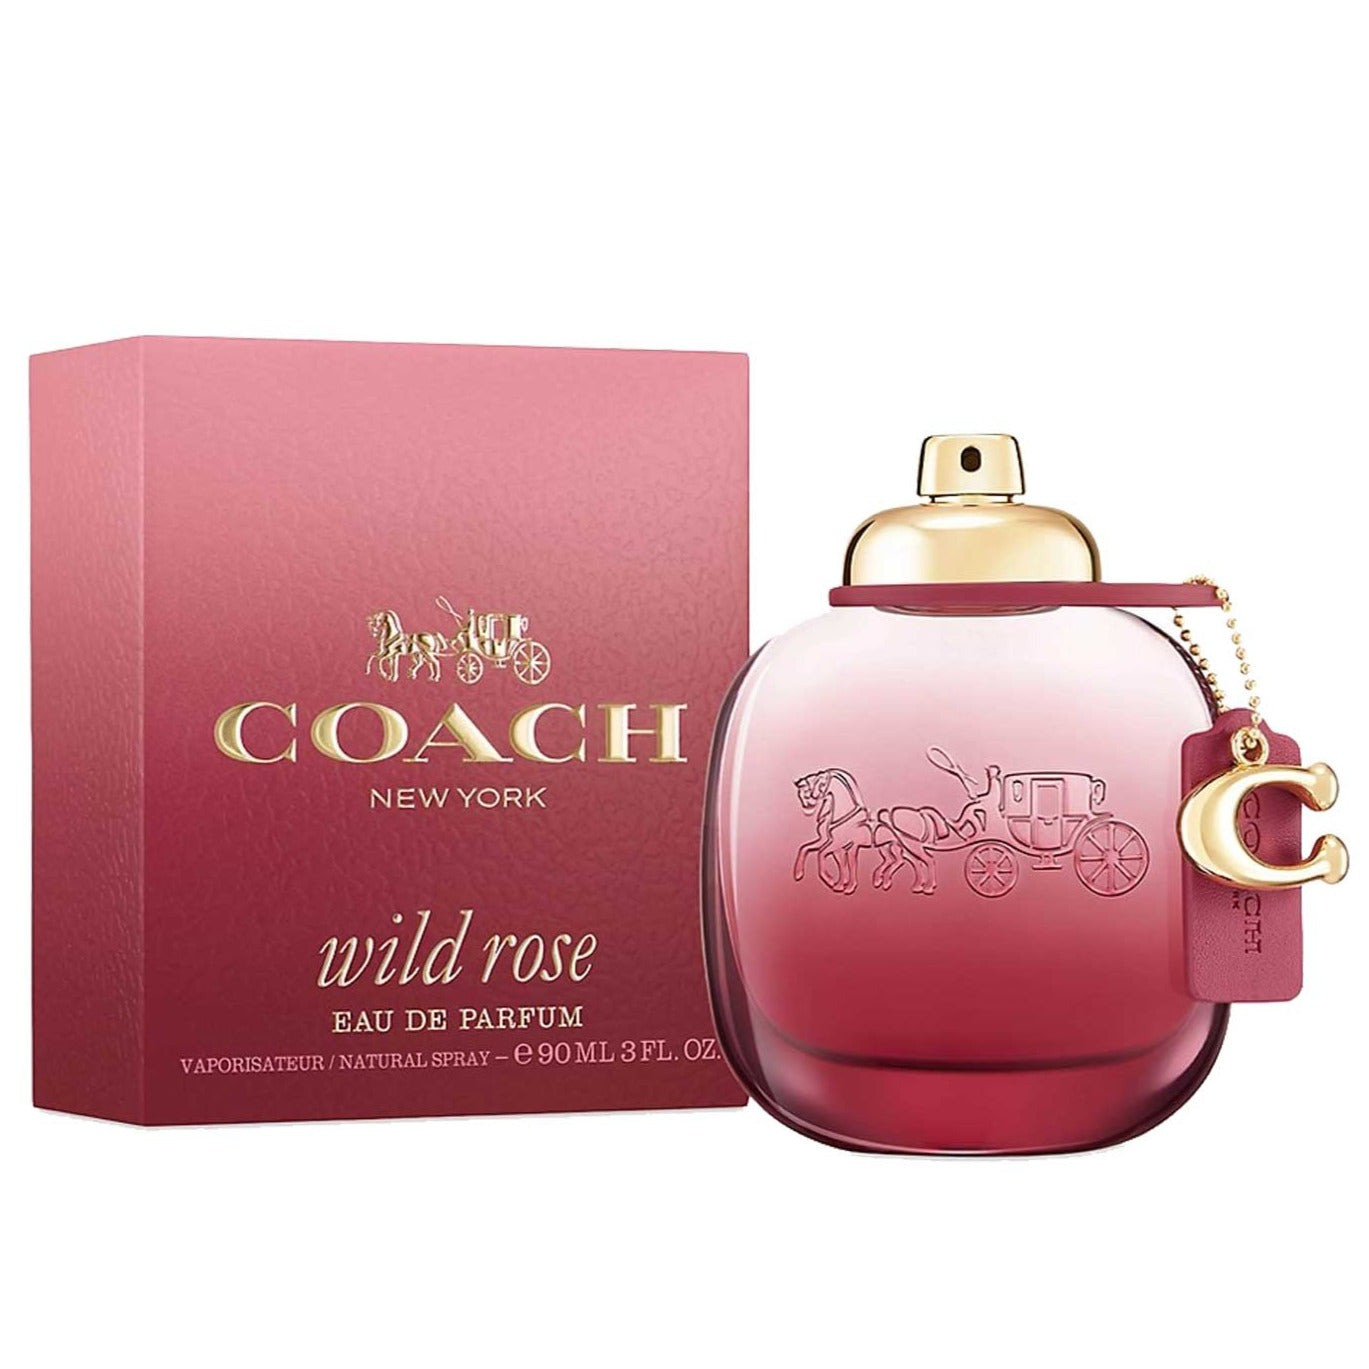 <p class="c-small-font c-margin-bottom-2v description" data-auto="product-description" data-mce-fragment="1" itemprop="description">COACH Wild Rose is inspired by COACH's prairie floral prints, a symbol of the House's free-spirited attitude. The delicate yet bold scent opens with juicy, sparkling redcurrant and sunny, spicy bergamot. The heart opens onto a lush meadow of delicate rose and jasmine sambac before finishing on a woodsy, warm dry down of crystal moss and dusky Ambroxan. "COACH Wild Rose captures the free-spirited attitude of COACH. Bold and sensual, it evokes the untamed beauty of fields of wildflowers and a feeling of possibility," says COACH Creative Director Stuart Vevers. The bottle features an ombré burgundy gradient inspired by romantic summer afternoons and a matching burgundy hangtag, a symbol of lasting quality and craftsmanship. The "C" charm adds a sweet detail and nods to the House Signature.<br><br><strong>KEY NOTES:</strong> Redcurrant, Bergamot, Rose, Jasmine Sambac, Crystal Moss, Ambroxan</p>